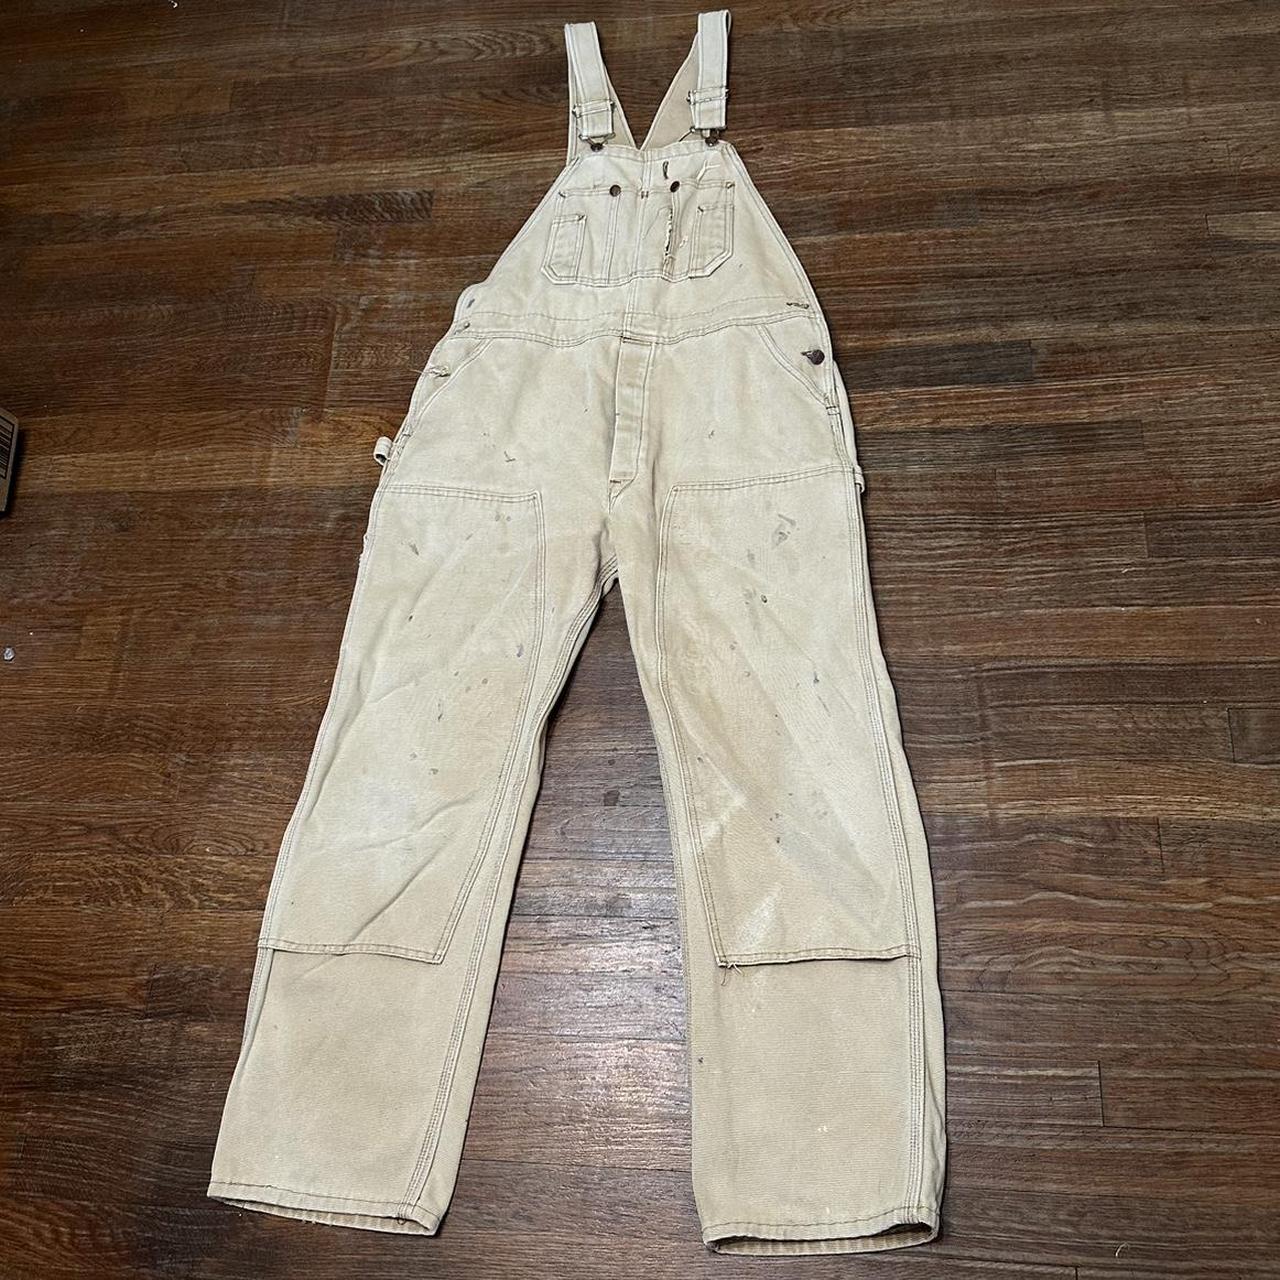 Vintage double knee pants overalls No tags fit a... - Depop